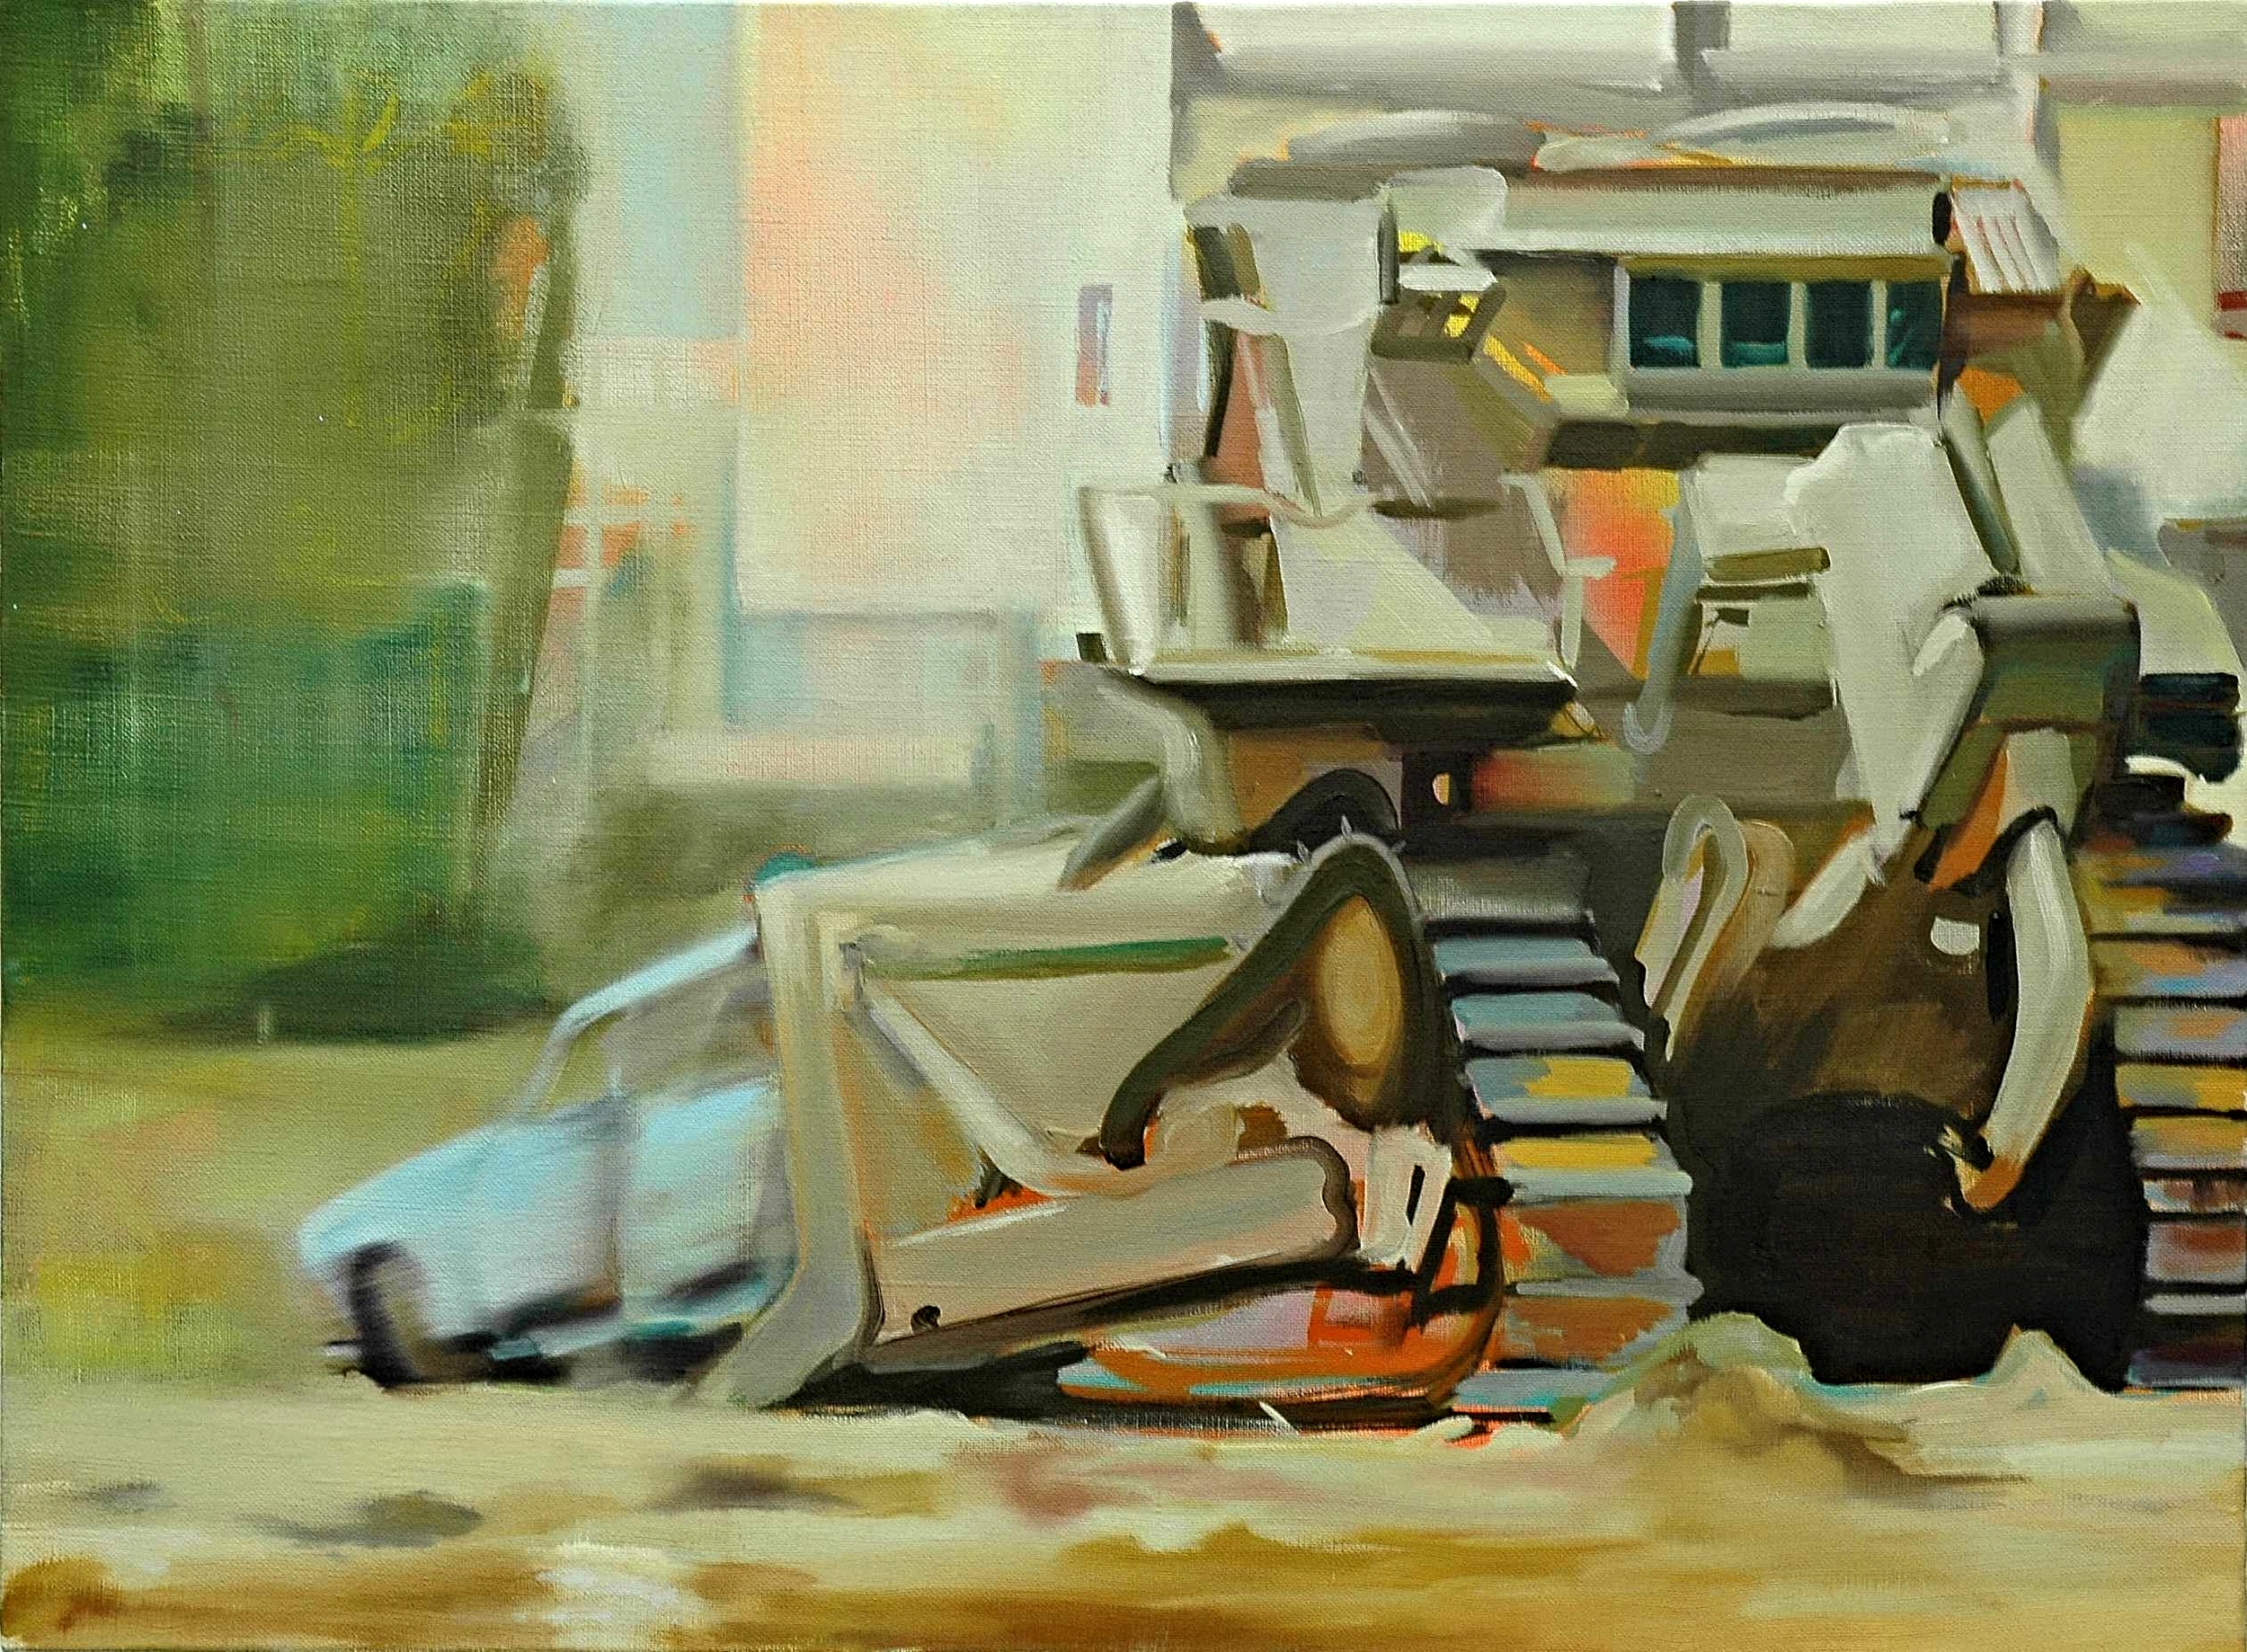   Mobile home , 2006, oil on canvas, 54 x 73cm. Private collection,&nbsp;France 